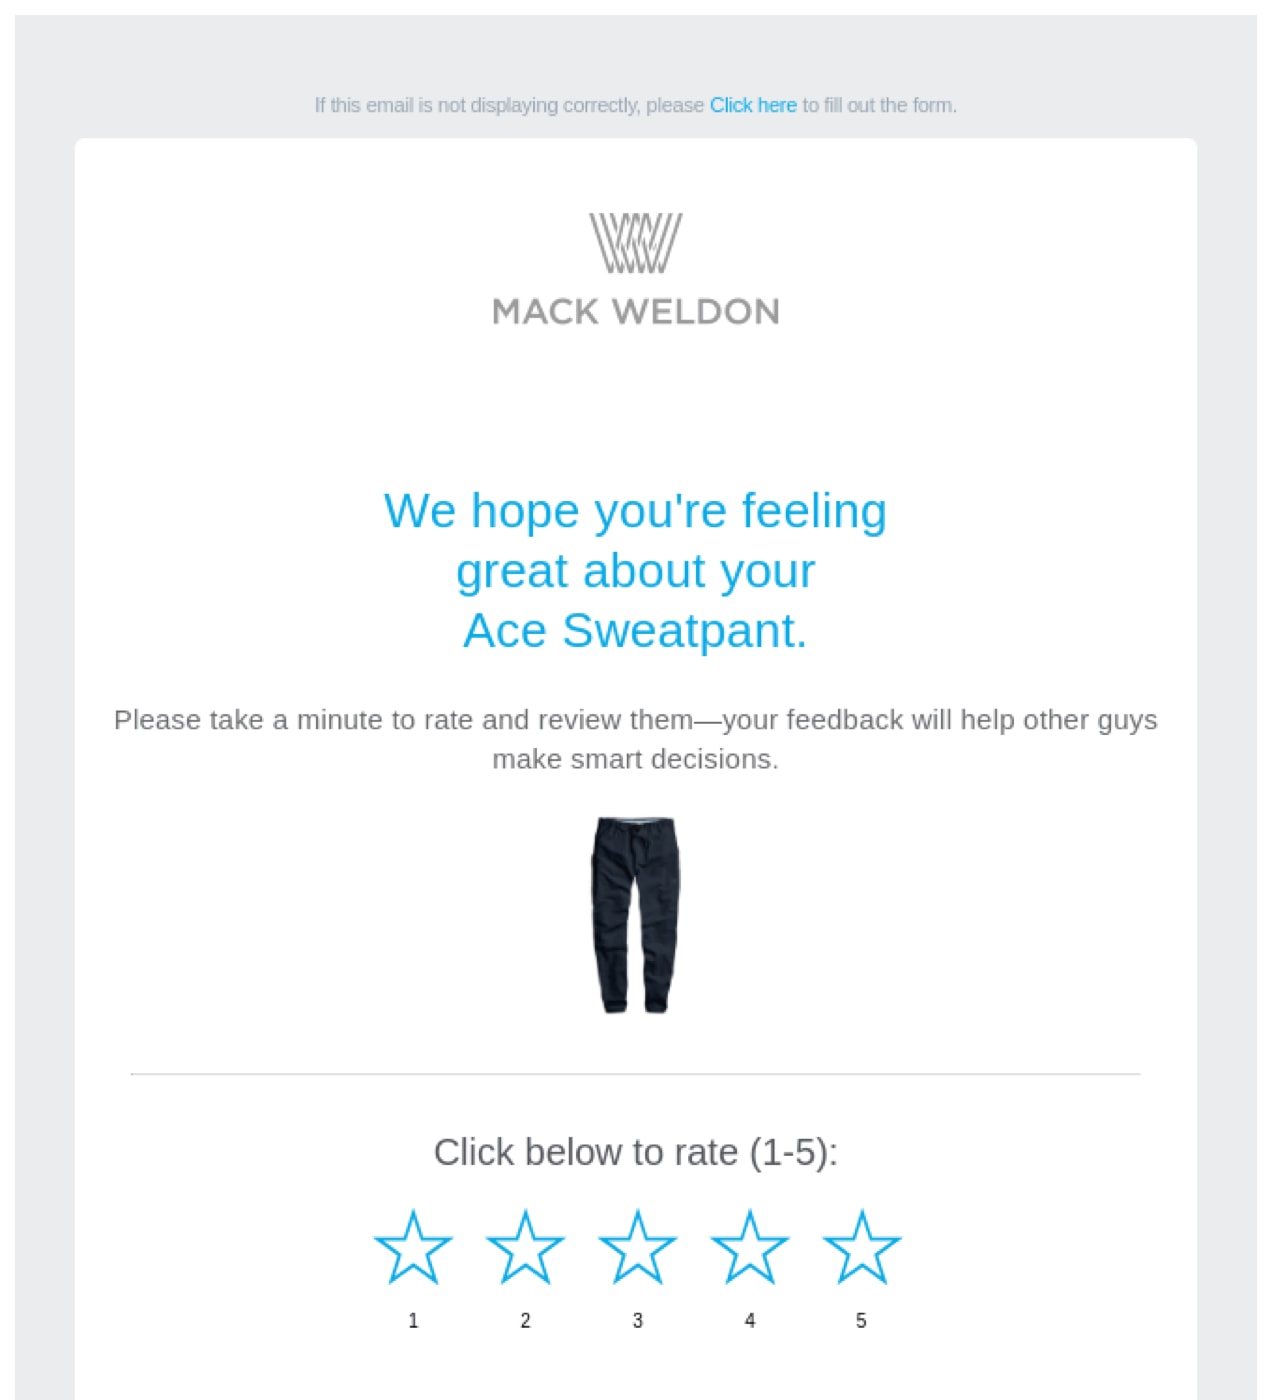 Mack Weldon email asking a customer for a review on the sweatpants they purchased